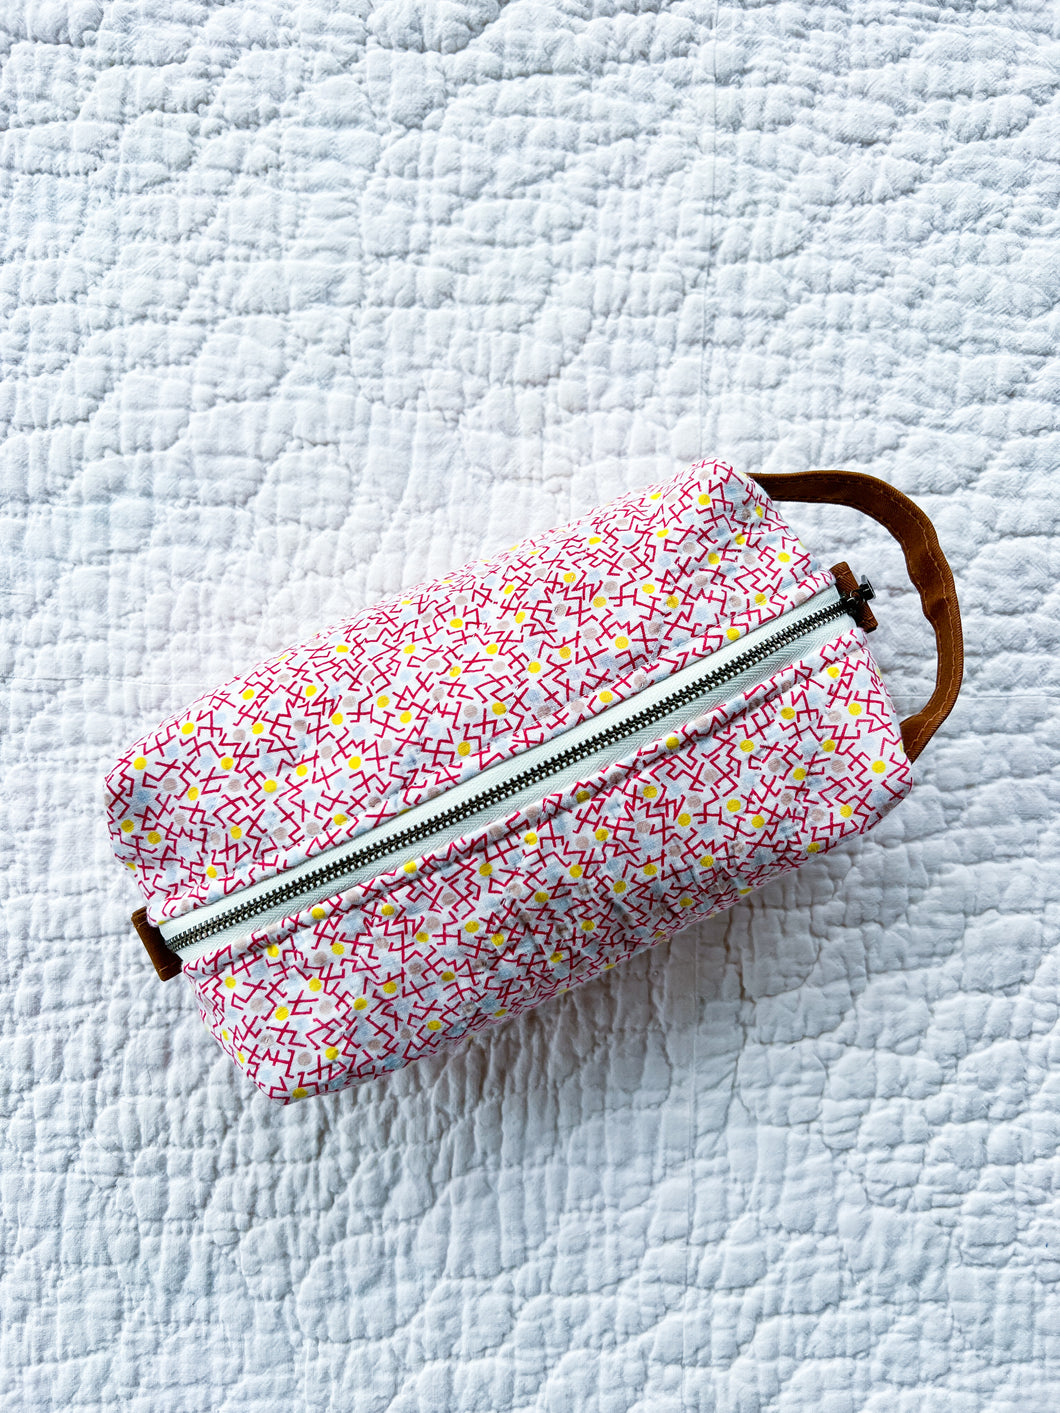 One-of-a-Kind: Confetti Travel Pocket (Waterproof Lined)